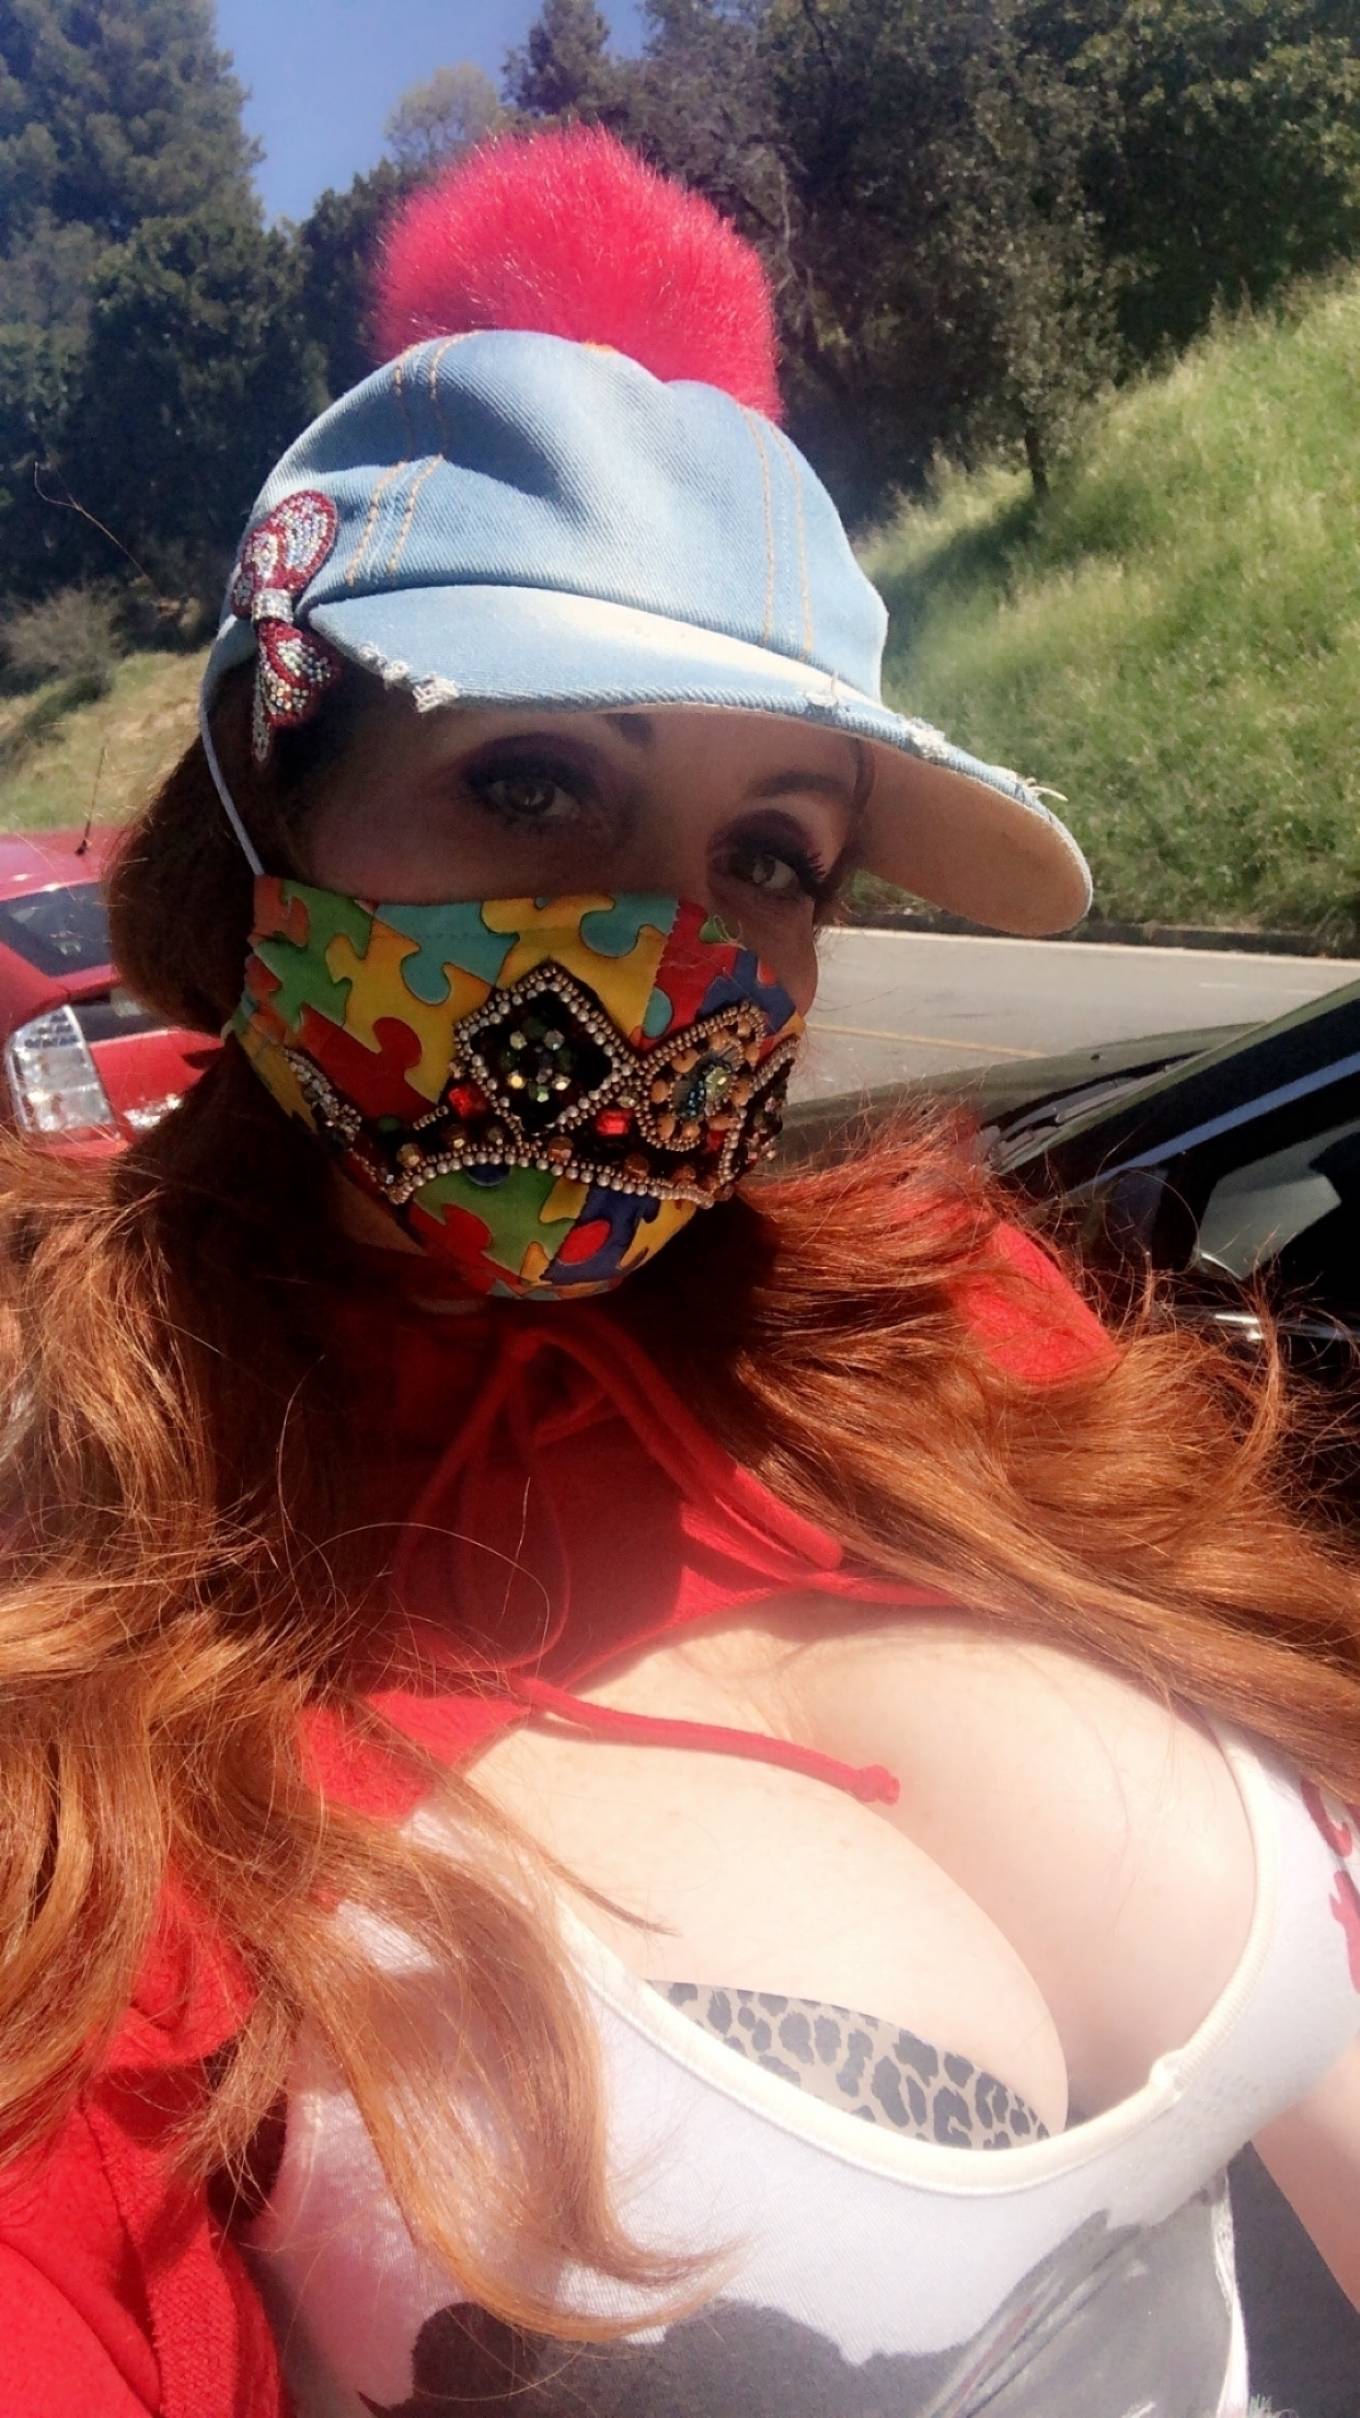 Phoebe Price â€“ With another COVID-19 personalized masks